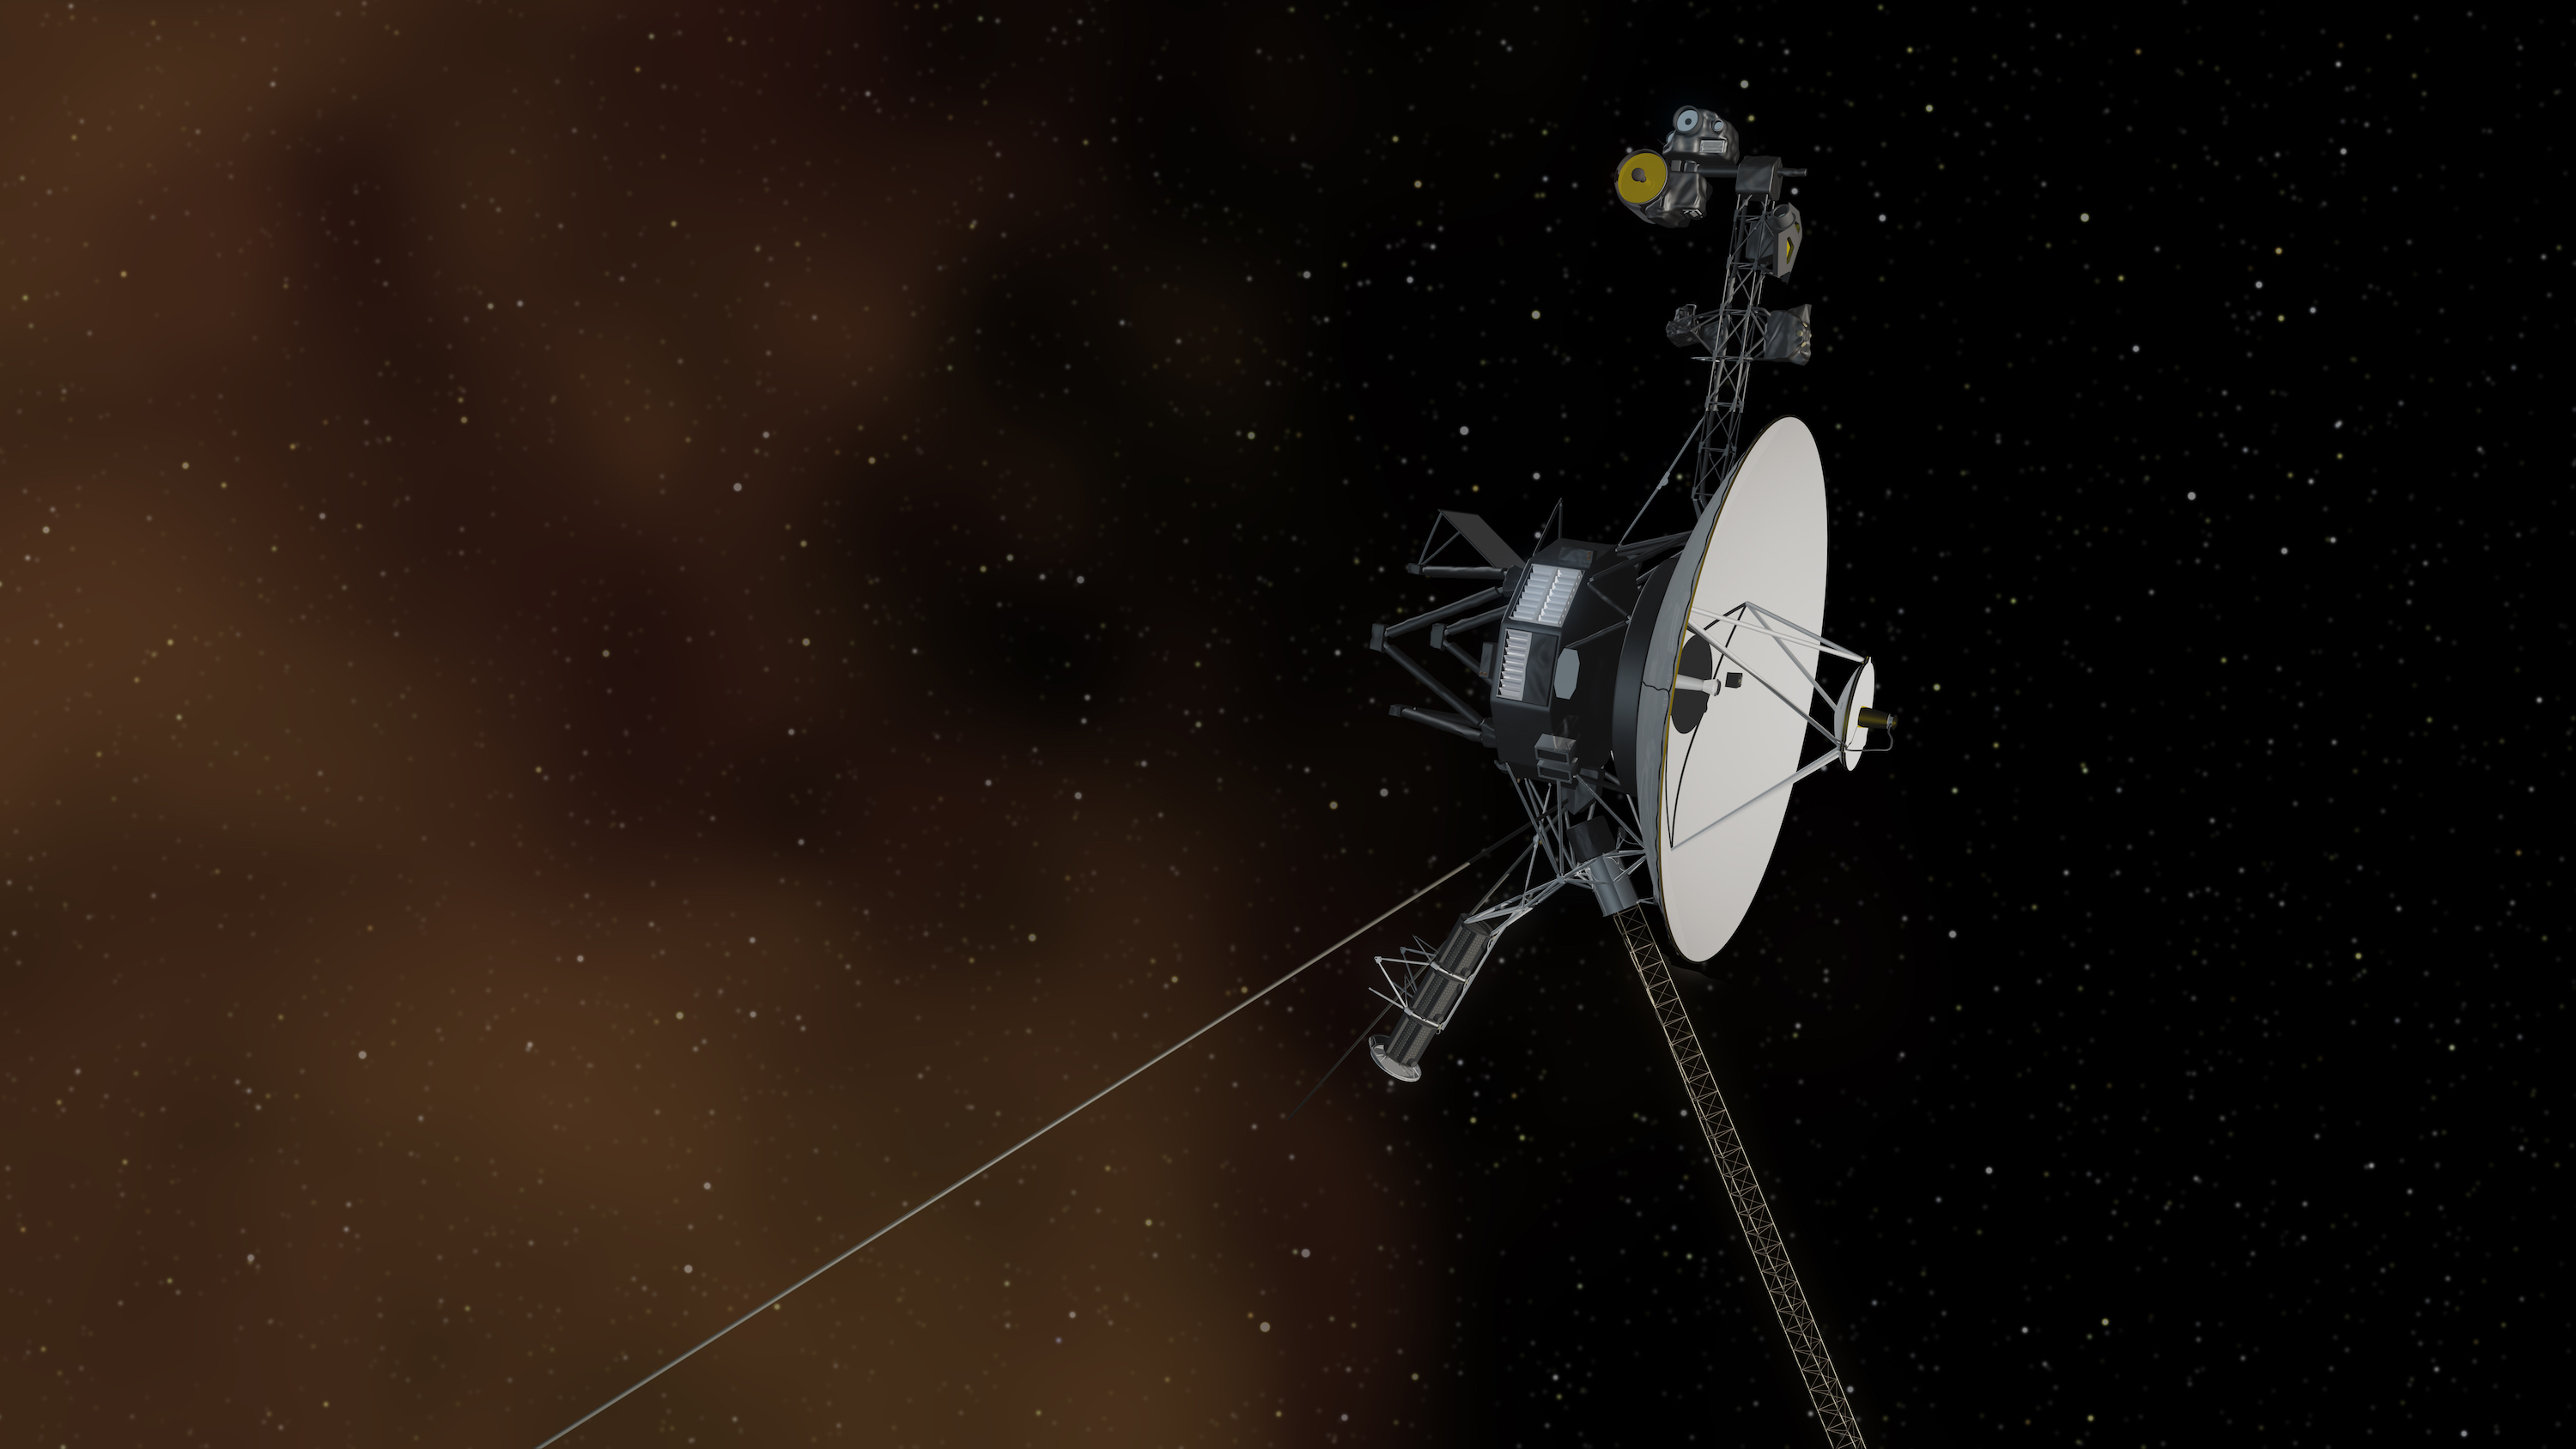 image of spacecraft against space background